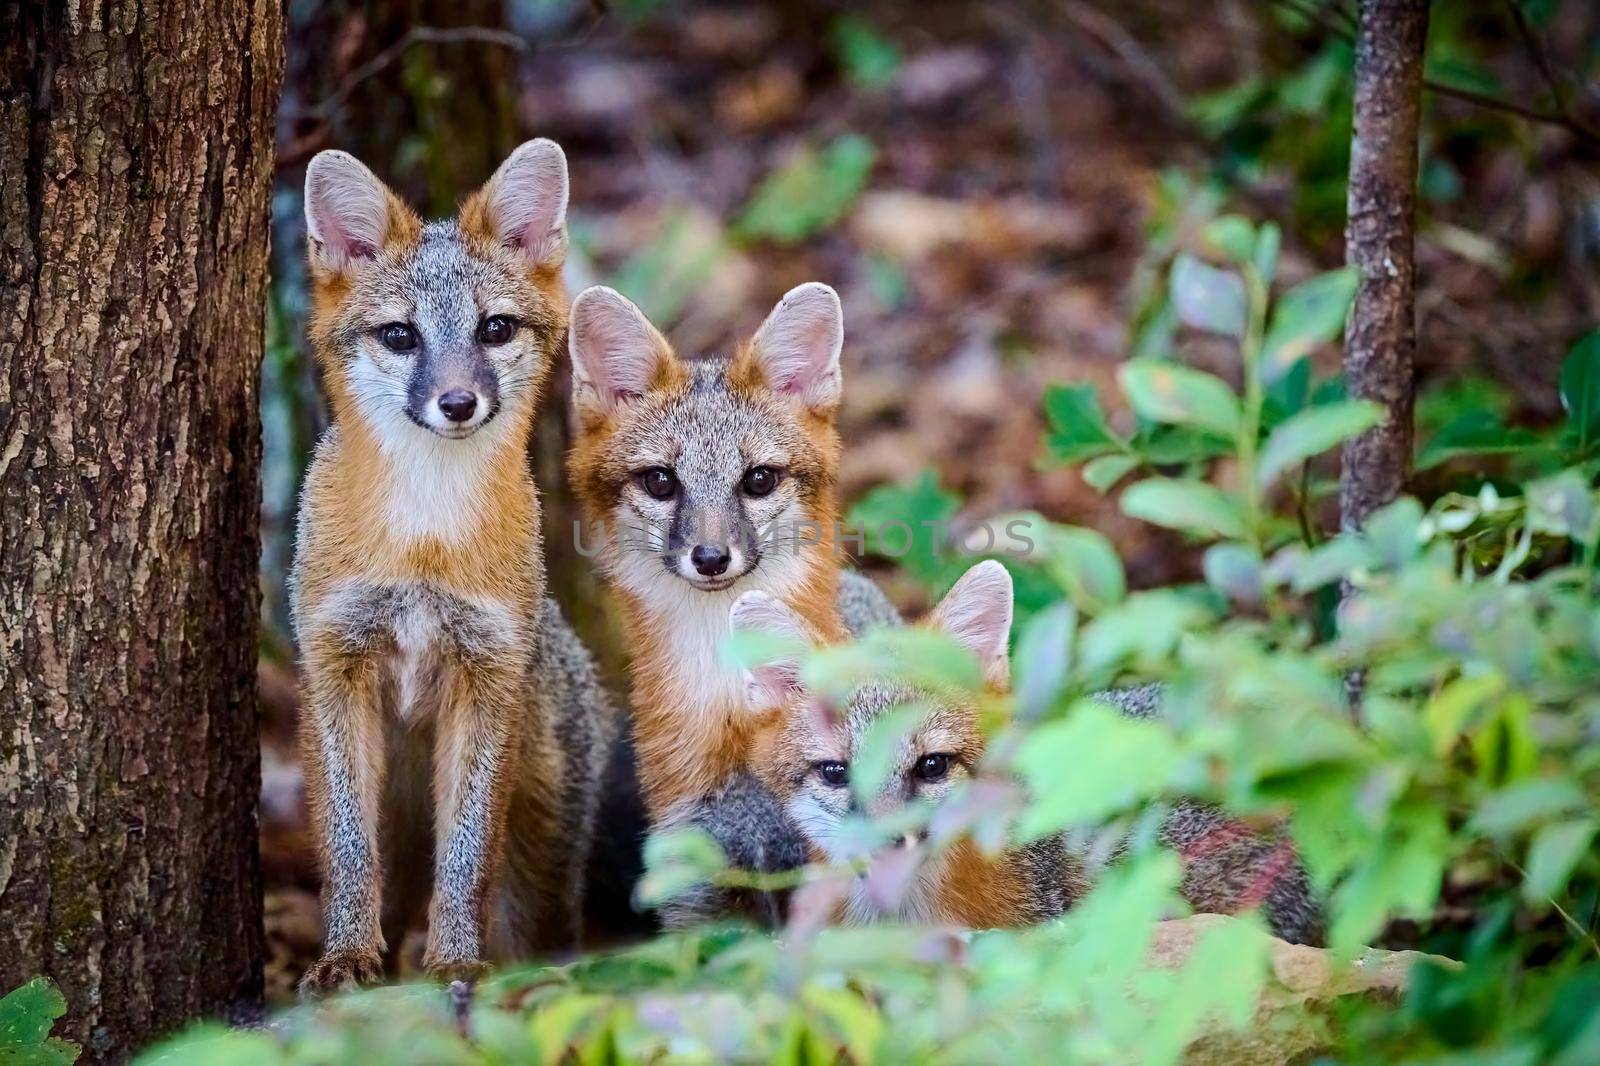 Three Juvenile Gray Fox Kits (Urocyon cinereoargenteus) in a forest staring at the camera.